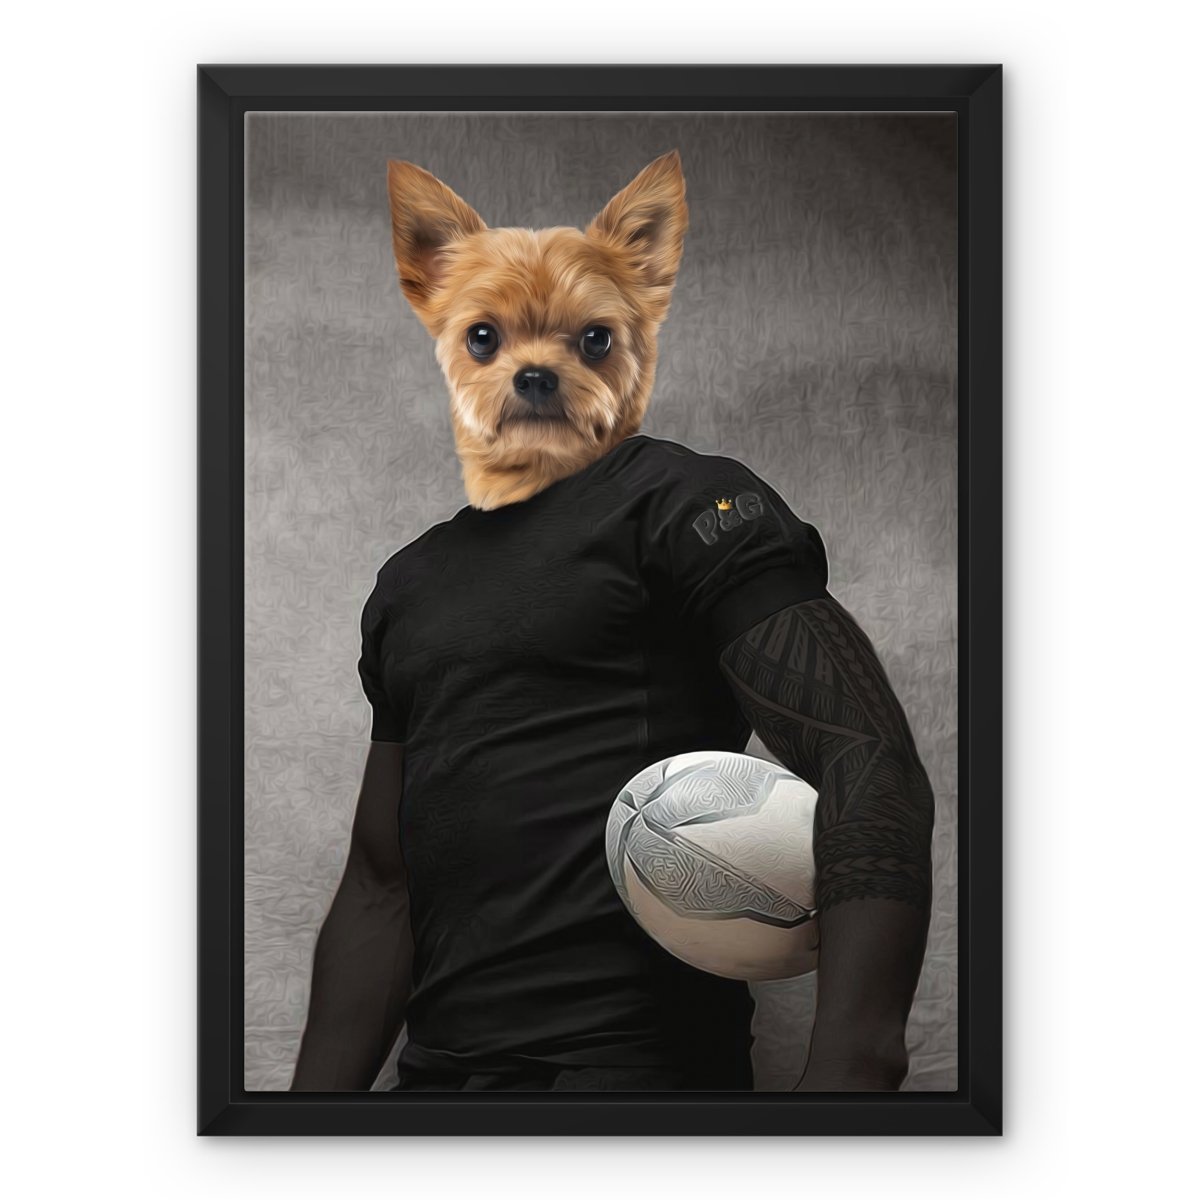 The Rugby Player: Custom Pet Canvas - Paw & Glory - #pet portraits# - #dog portraits# - #pet portraits uk#pawandglory, pet art canvas,pet art canvas, dog art canvas, custom pet canvas, pet photo canvas, pet on canvas